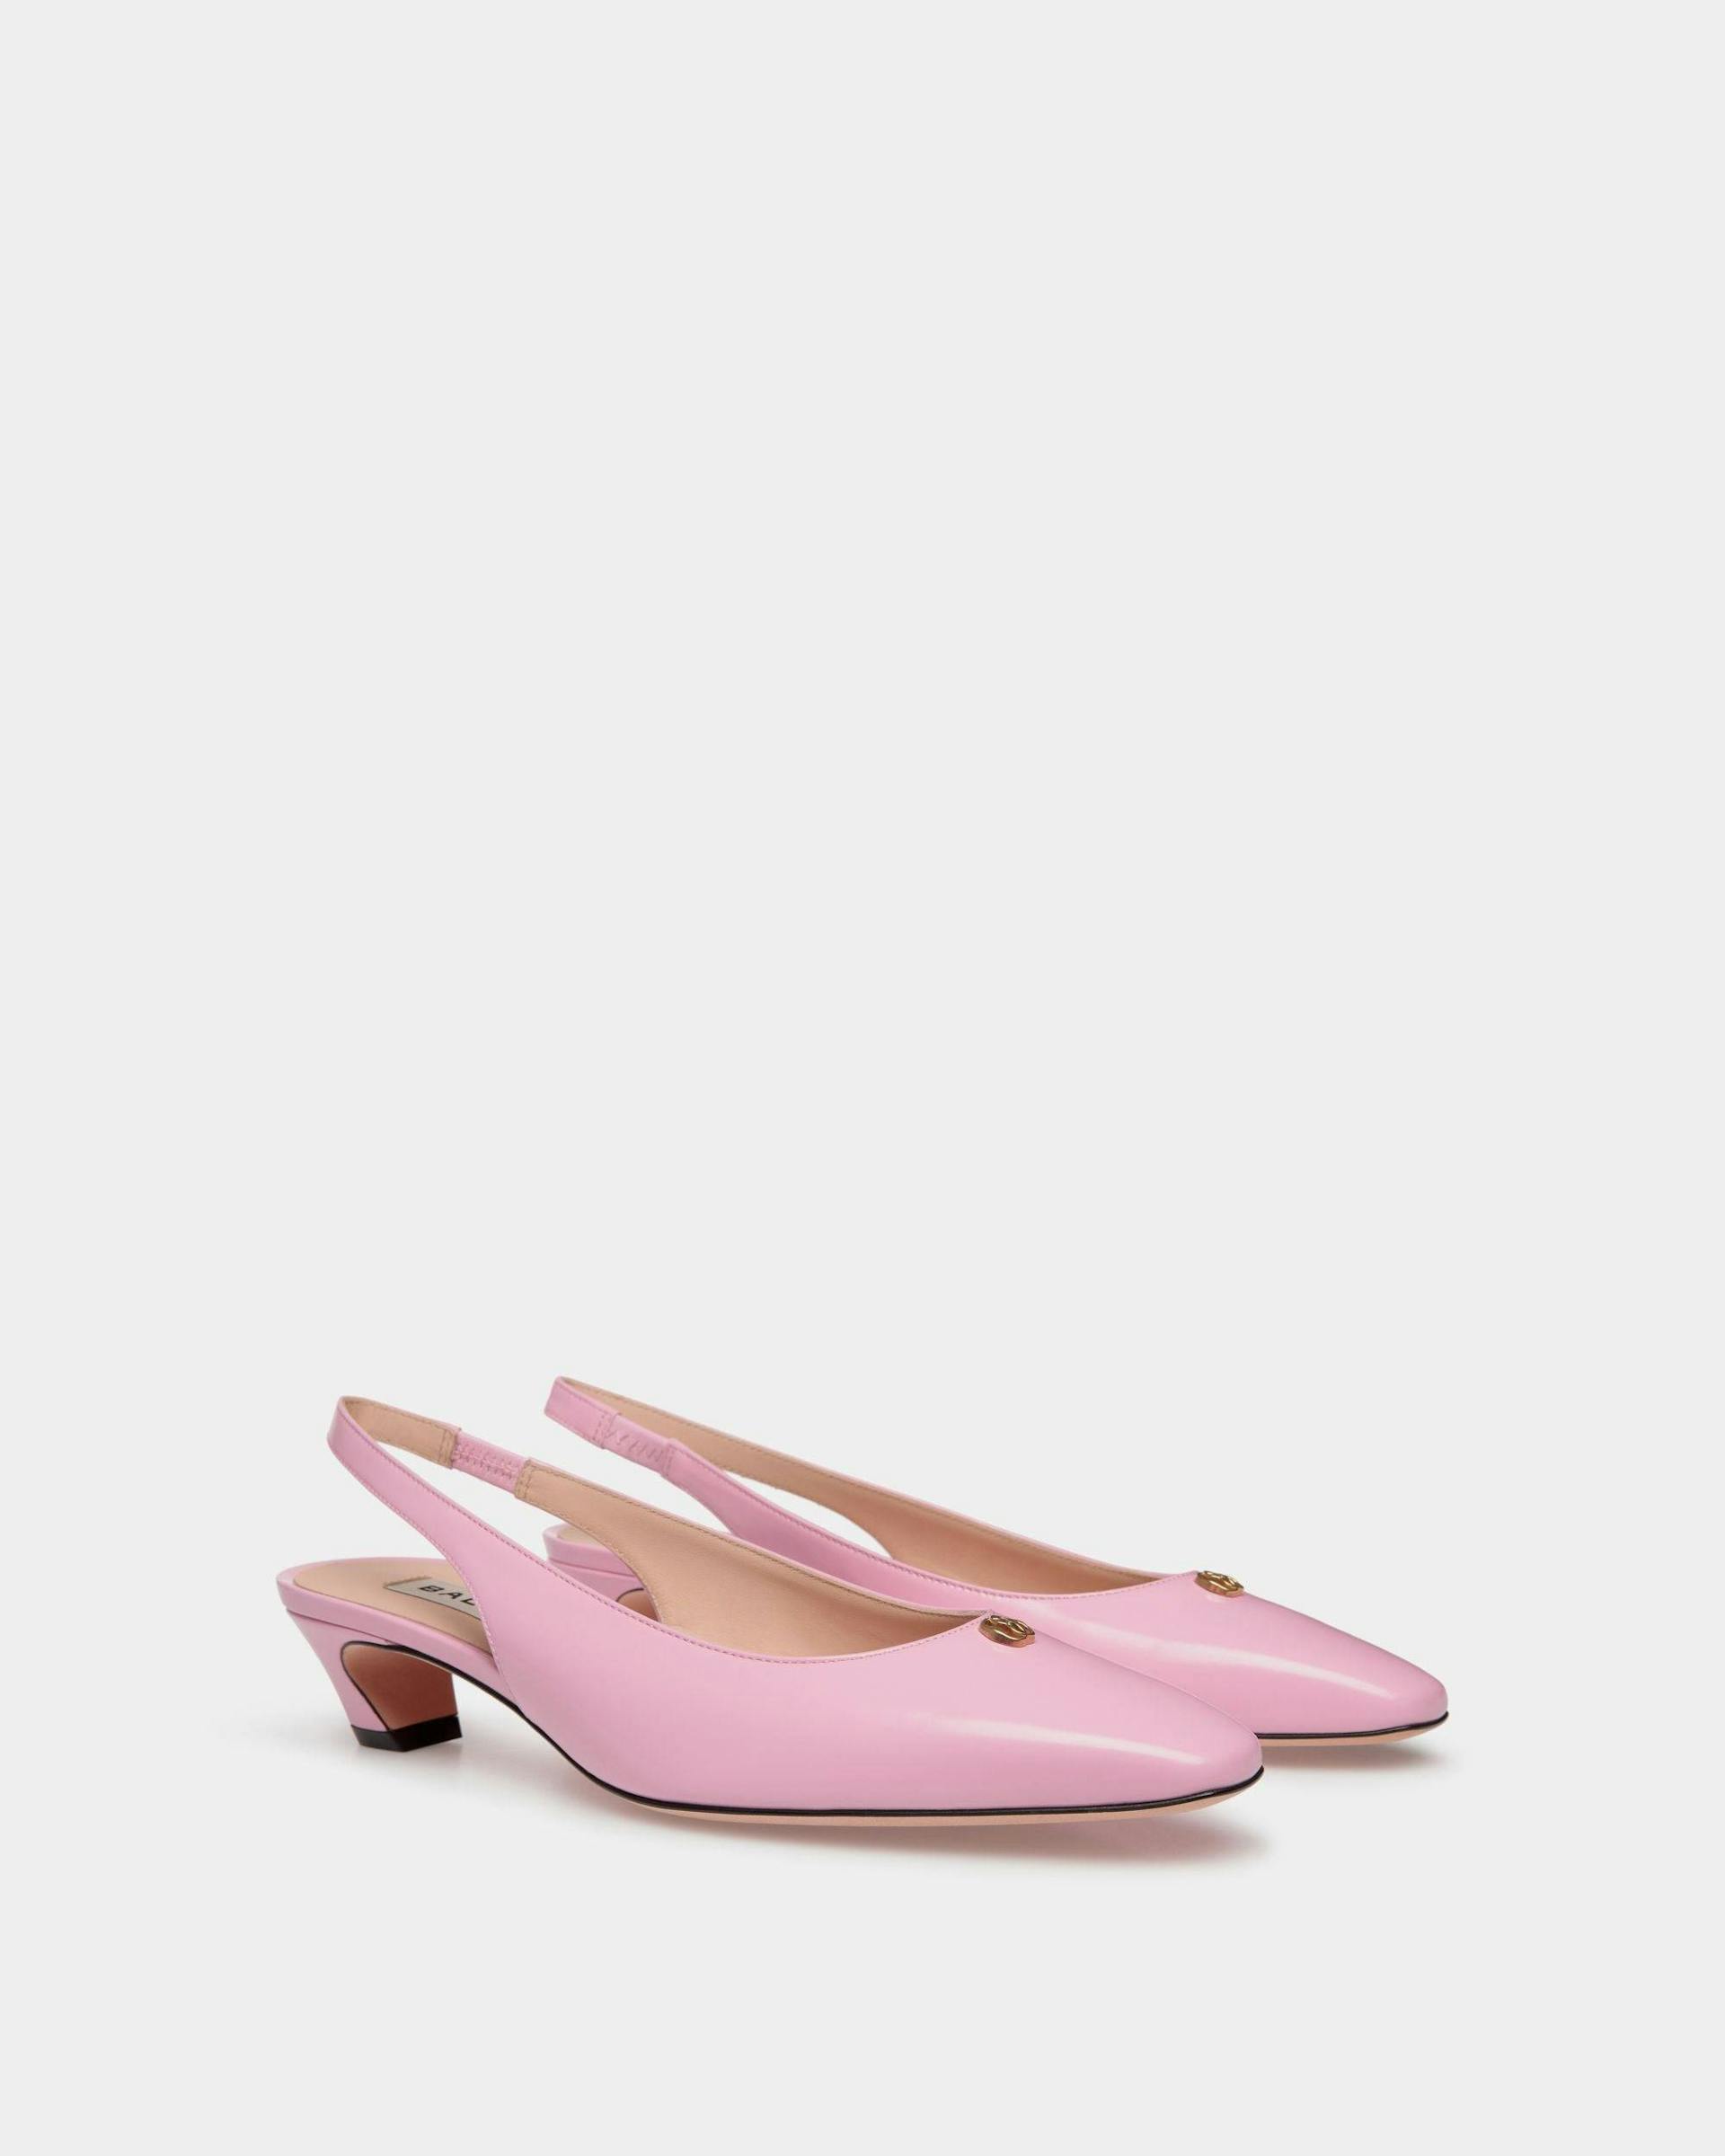 Sylt | Women's Slingback Pump in Pink Leather | Bally